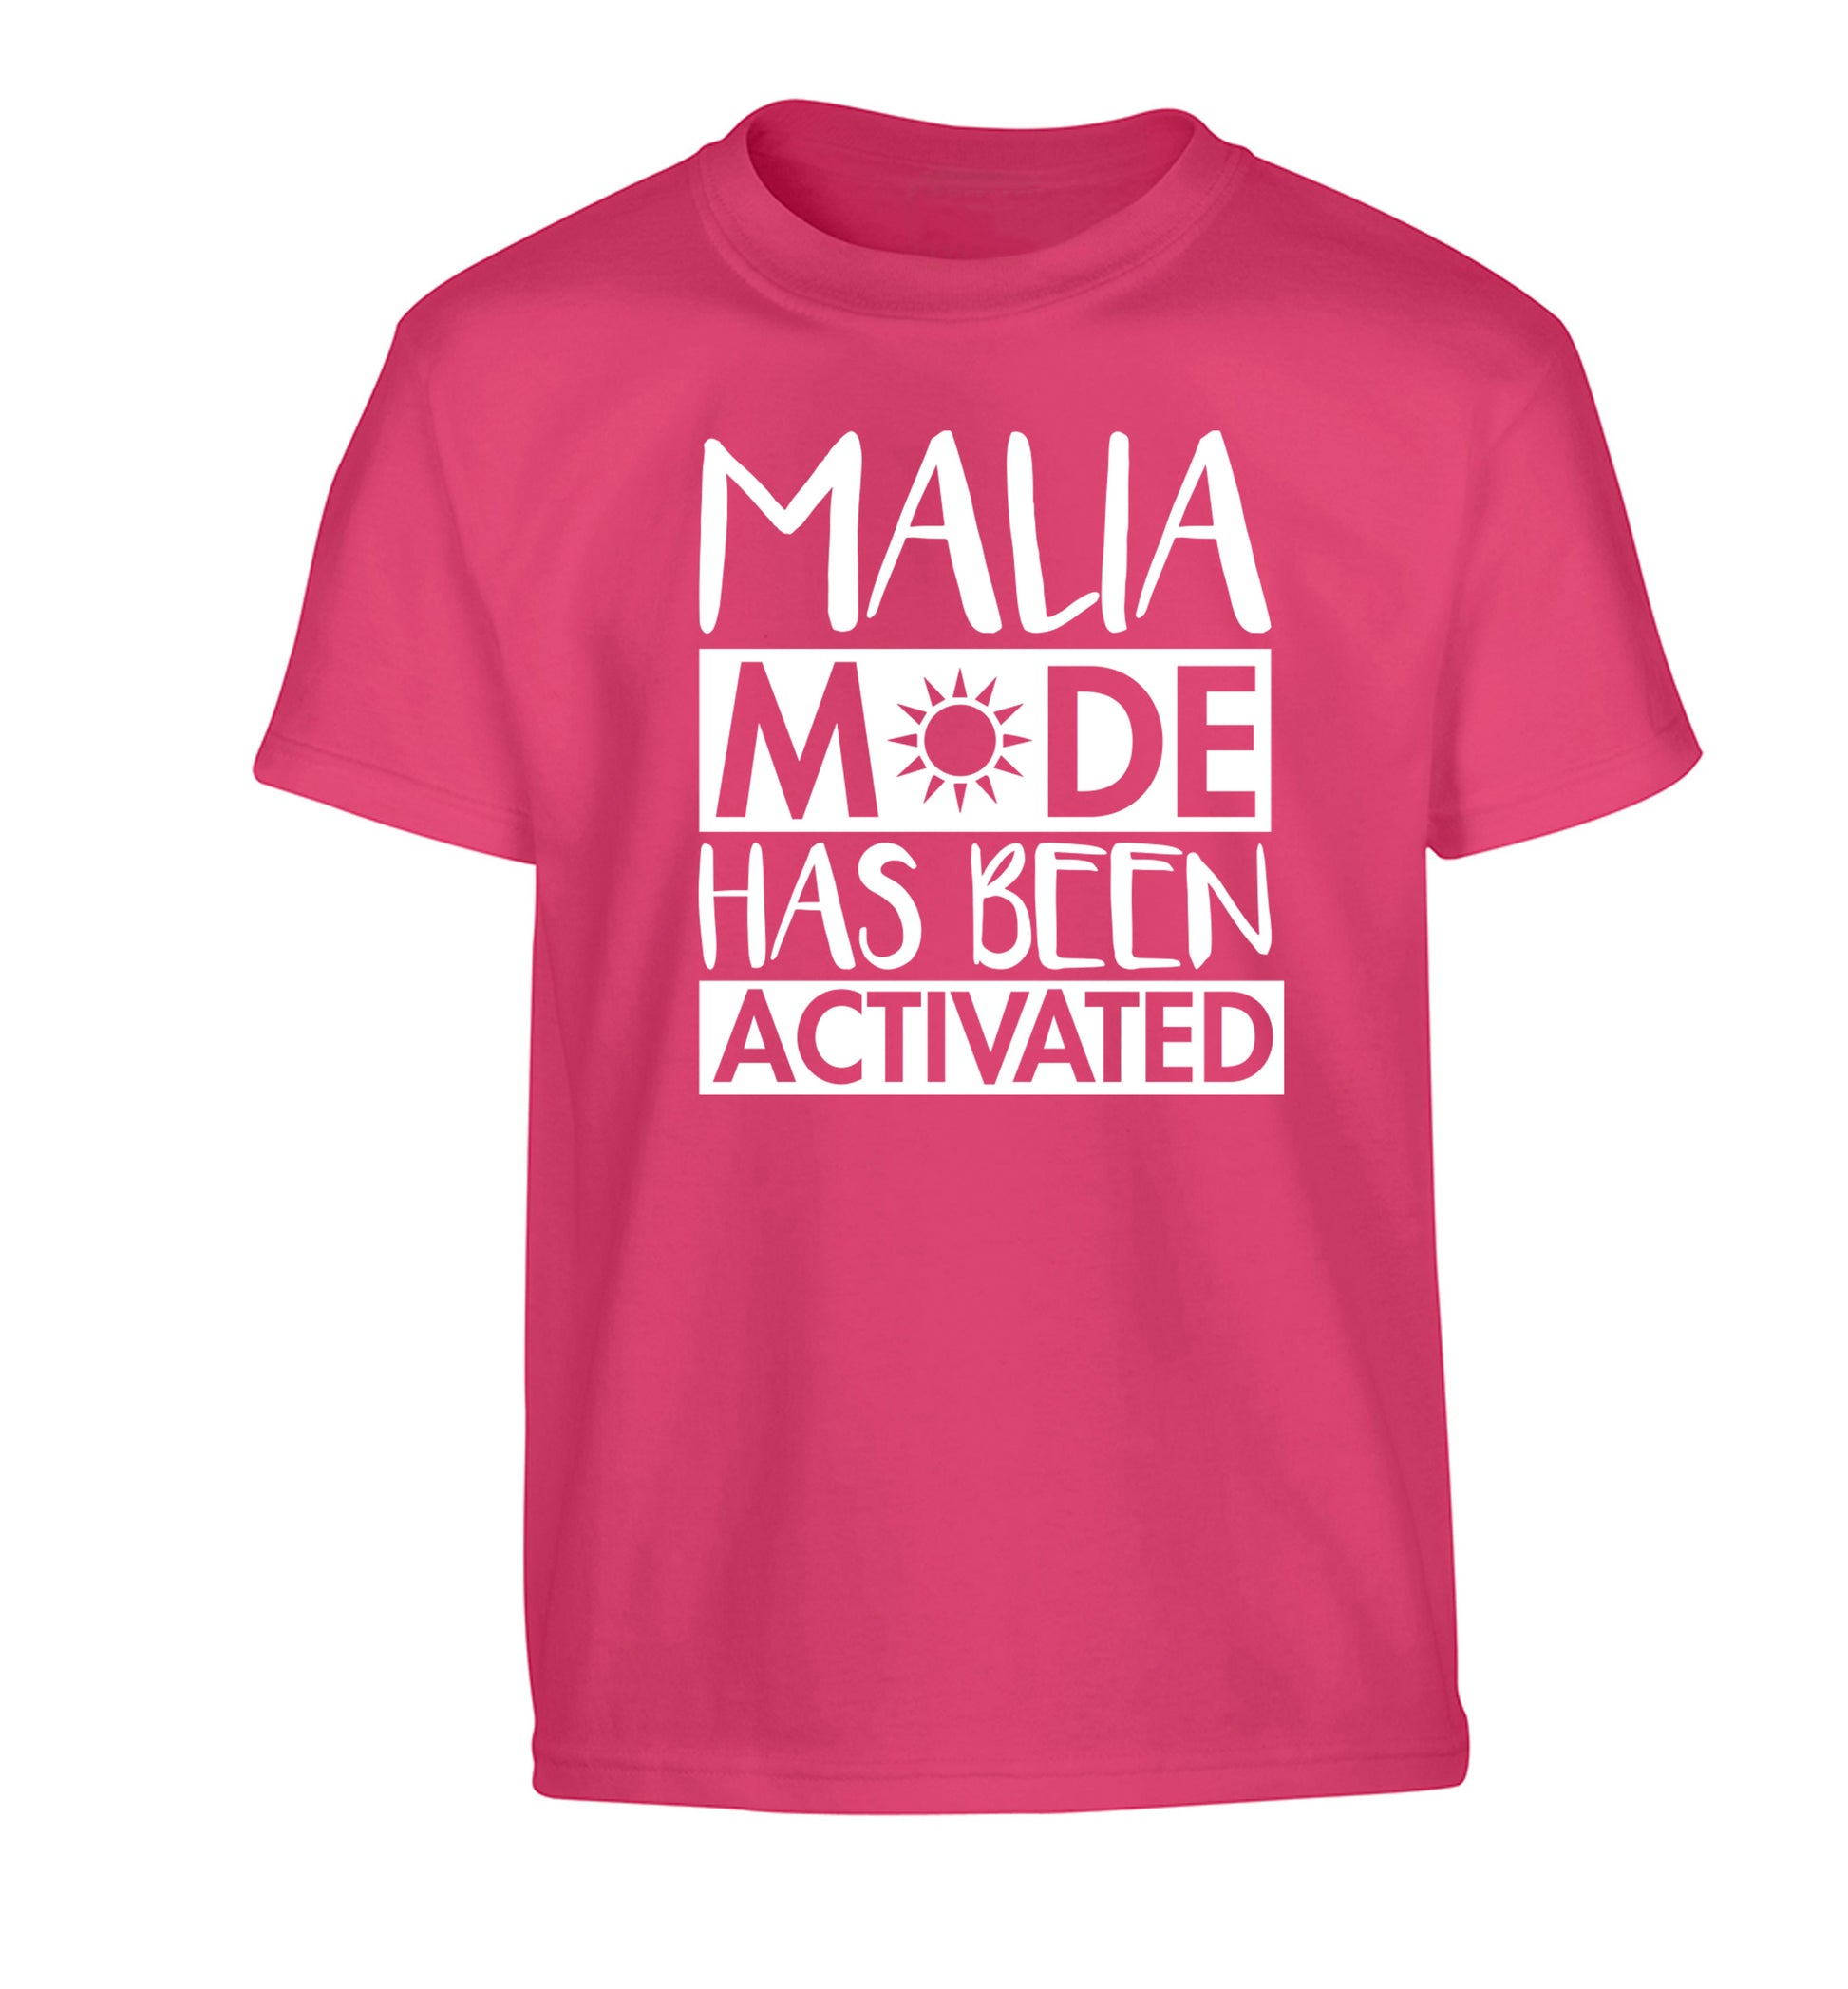 Malia mode has been activated Children's pink Tshirt 12-13 Years